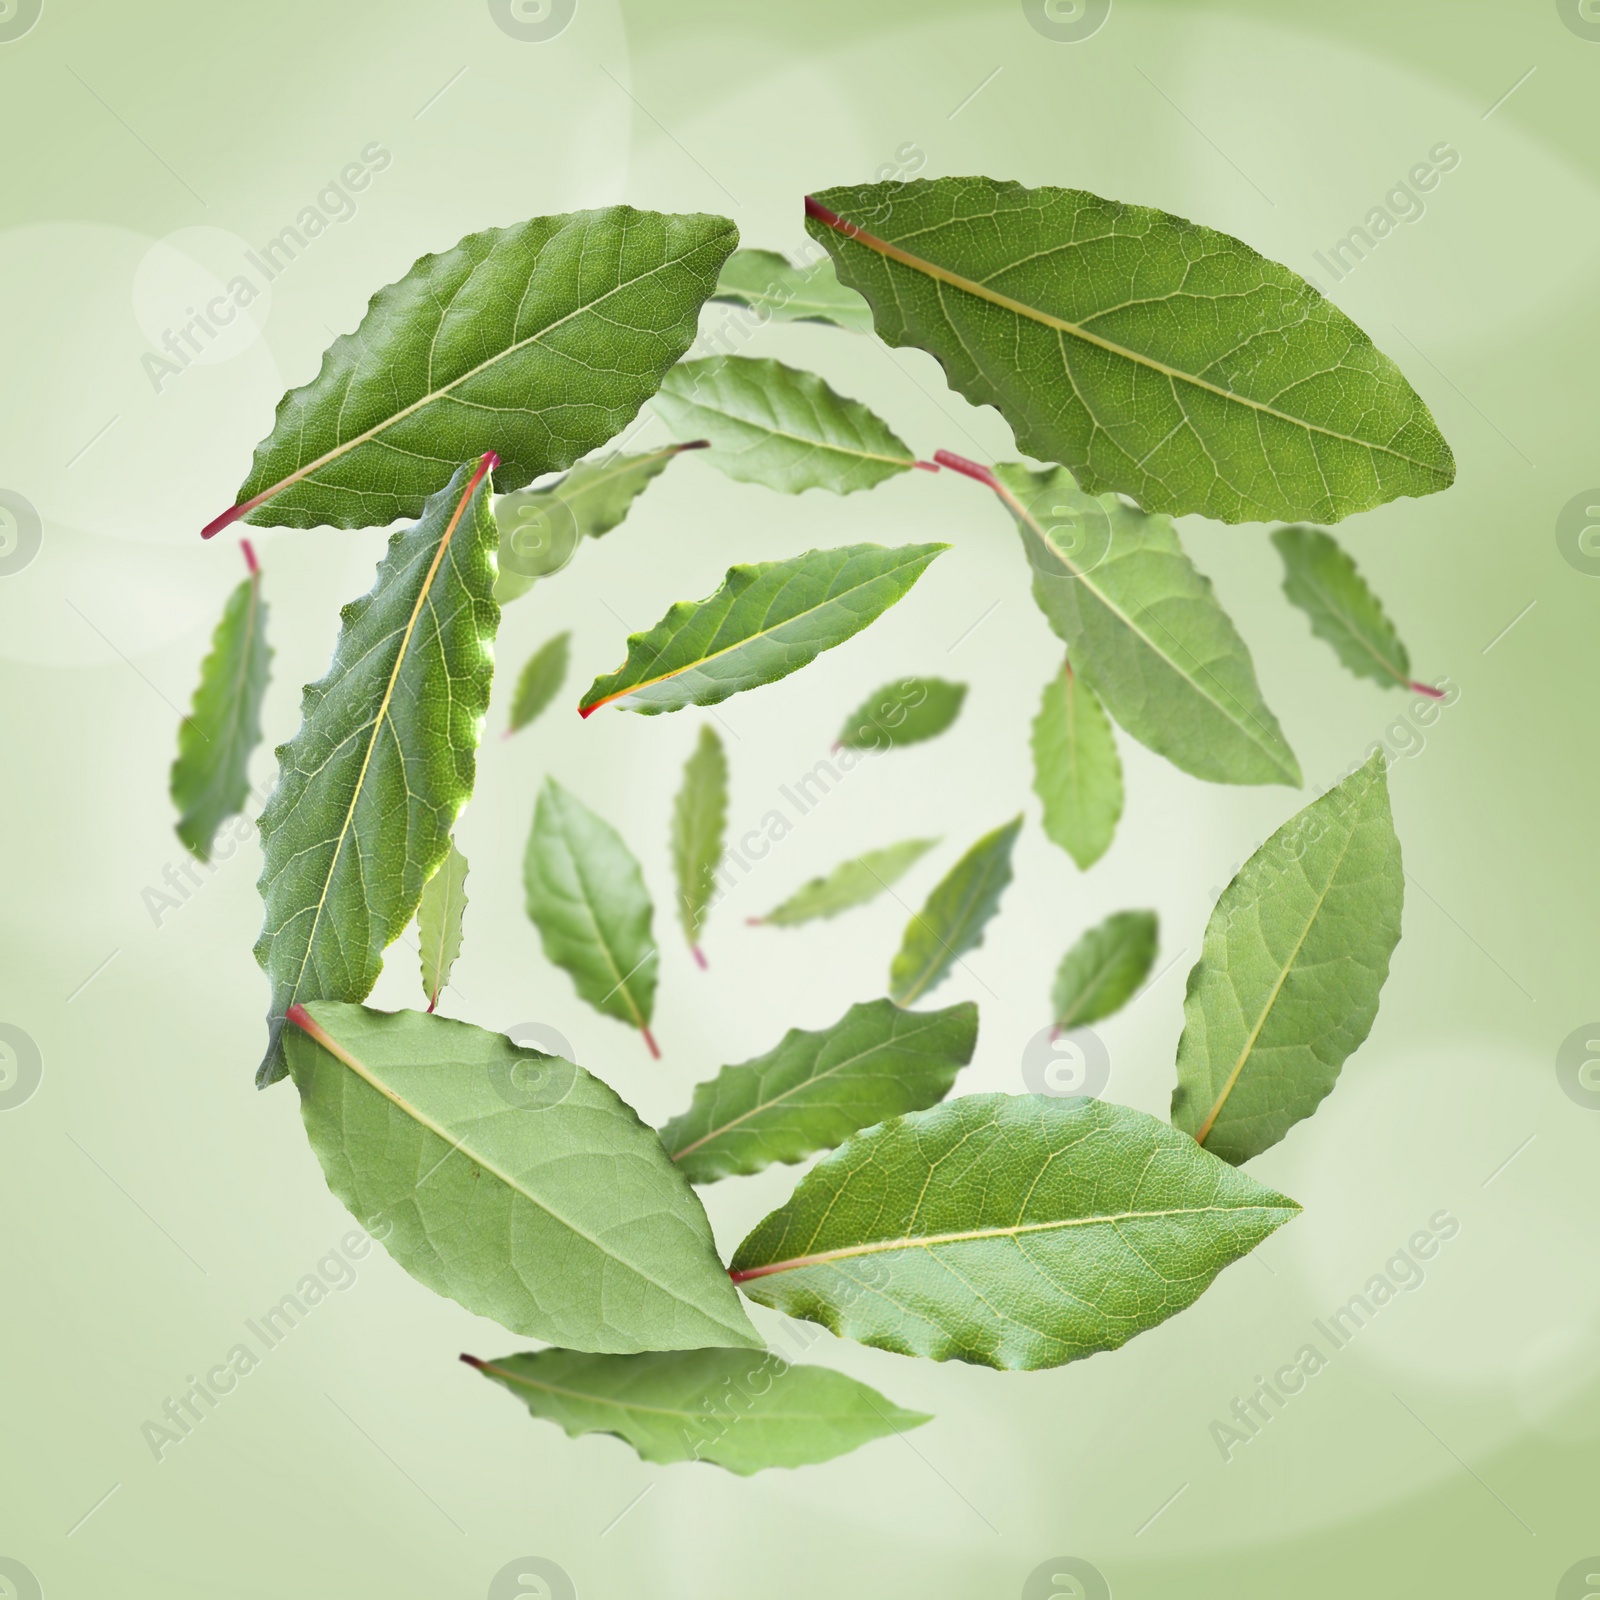 Image of Fresh bay leaves whirling on light green background